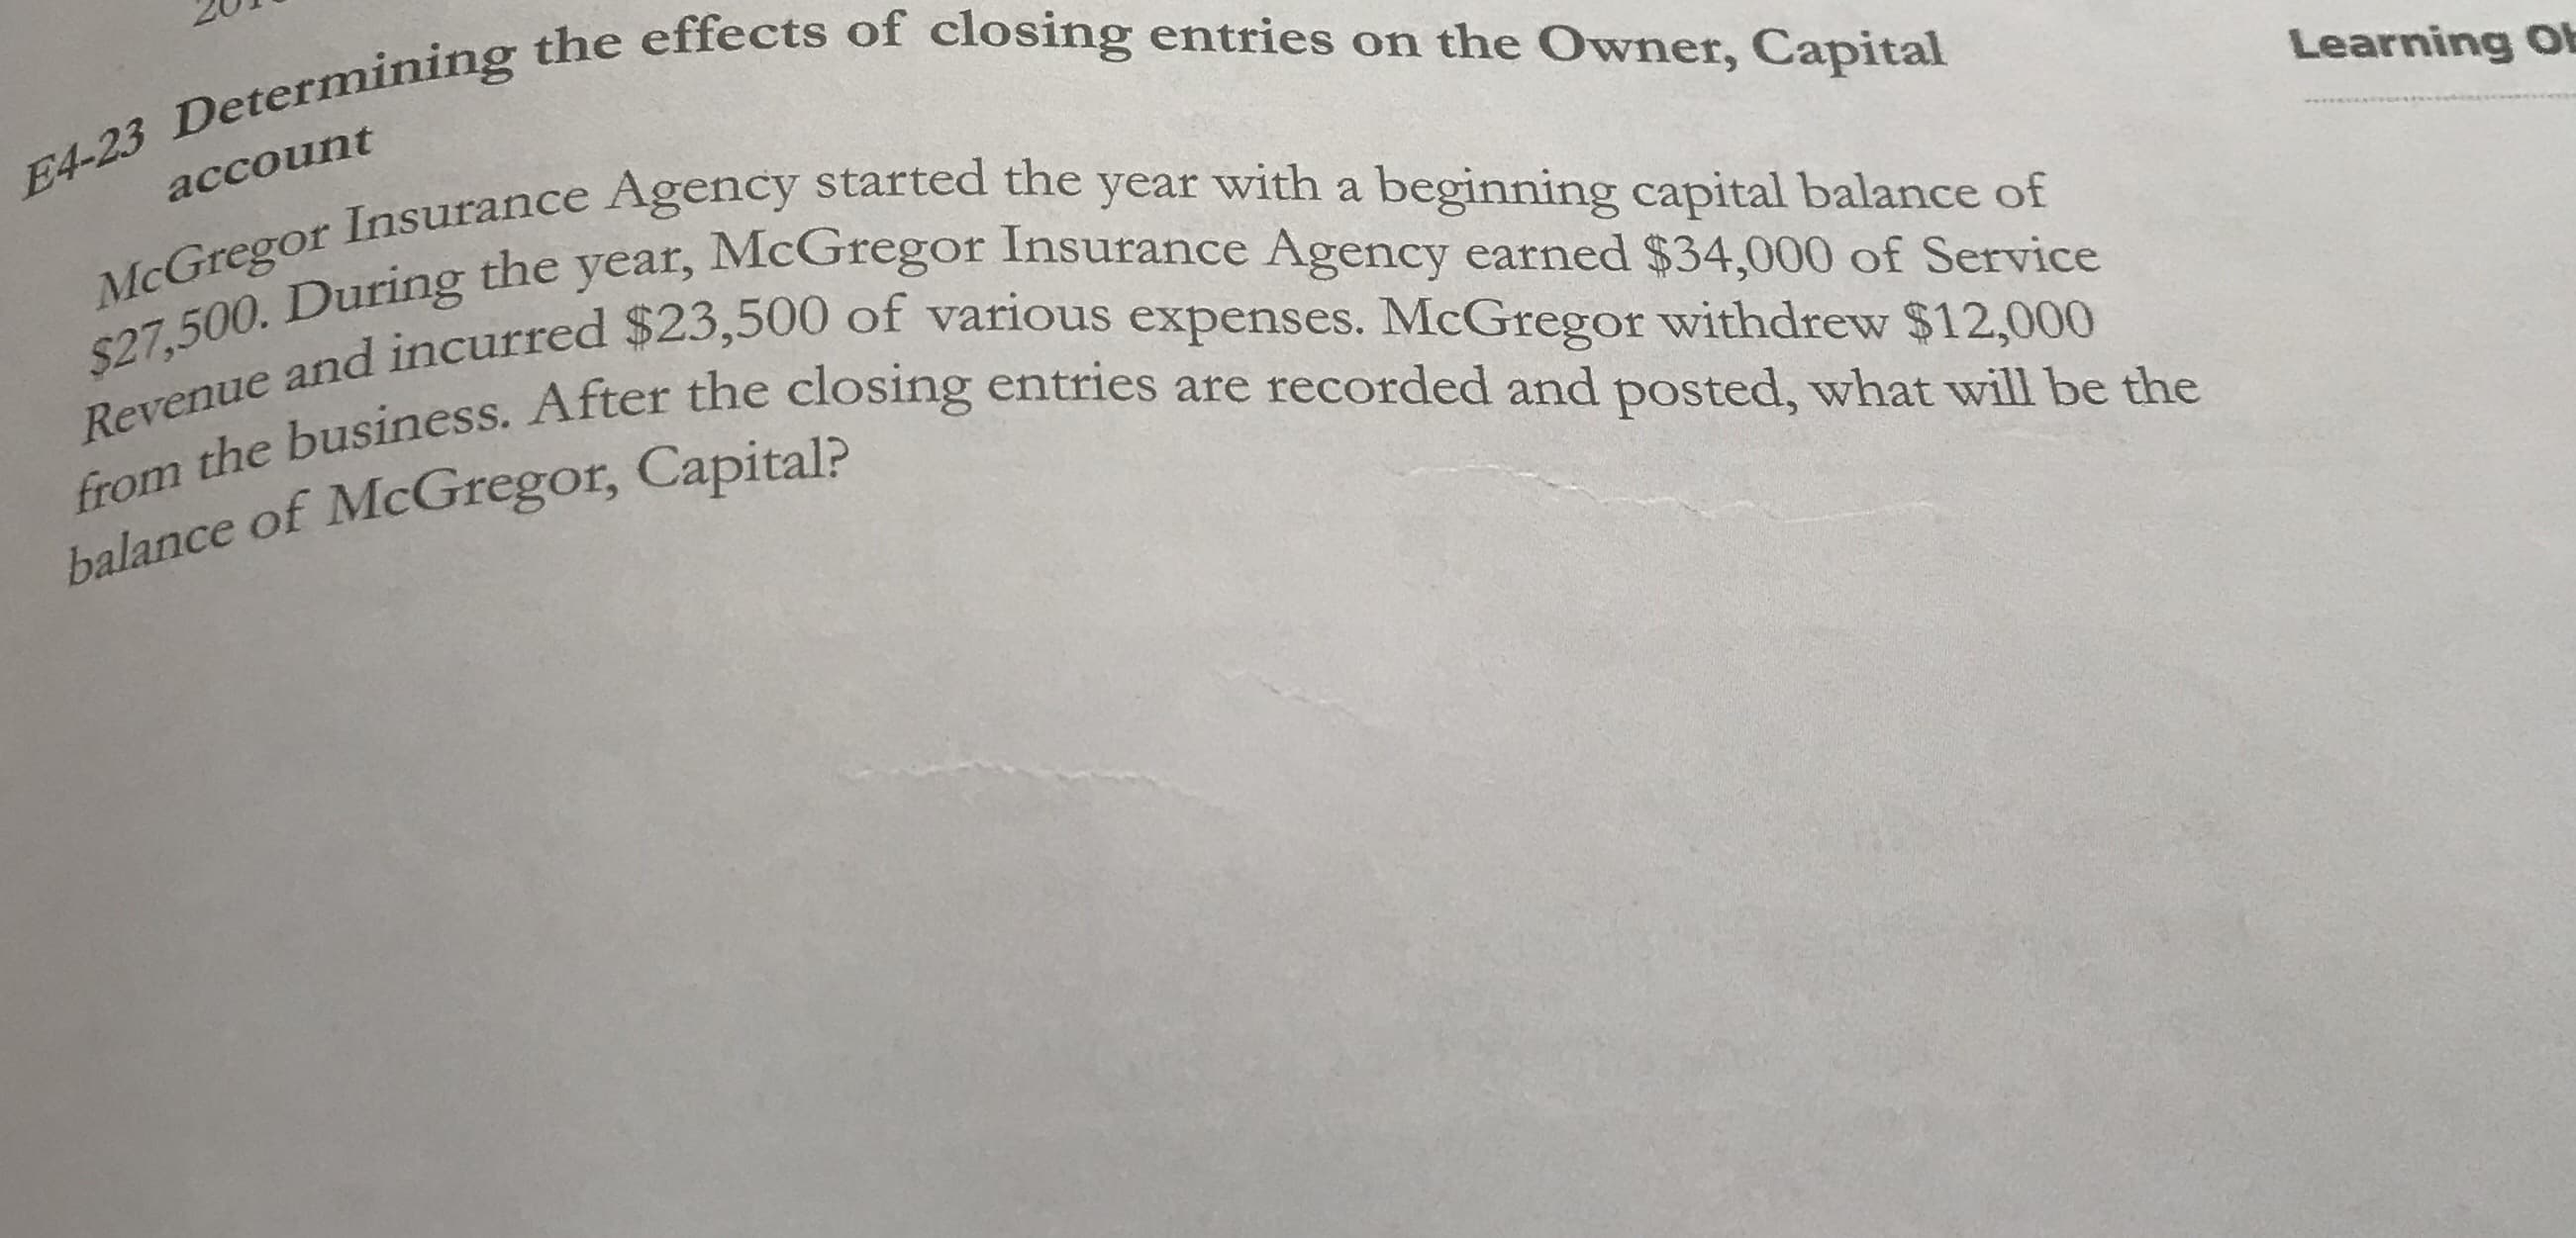 4-2
account
McGregor Insurance Agency started the year with a beginning capital balance of
$27,500. During the year, McGregor Insurance Agency earned $34,000 of Service
Revenue and incurred $23,500 of various expenses. McGregor withdrew $12,000
from the business. After the closing entries are recorded and posted, what will be the
balance of McGregor, Capital?
